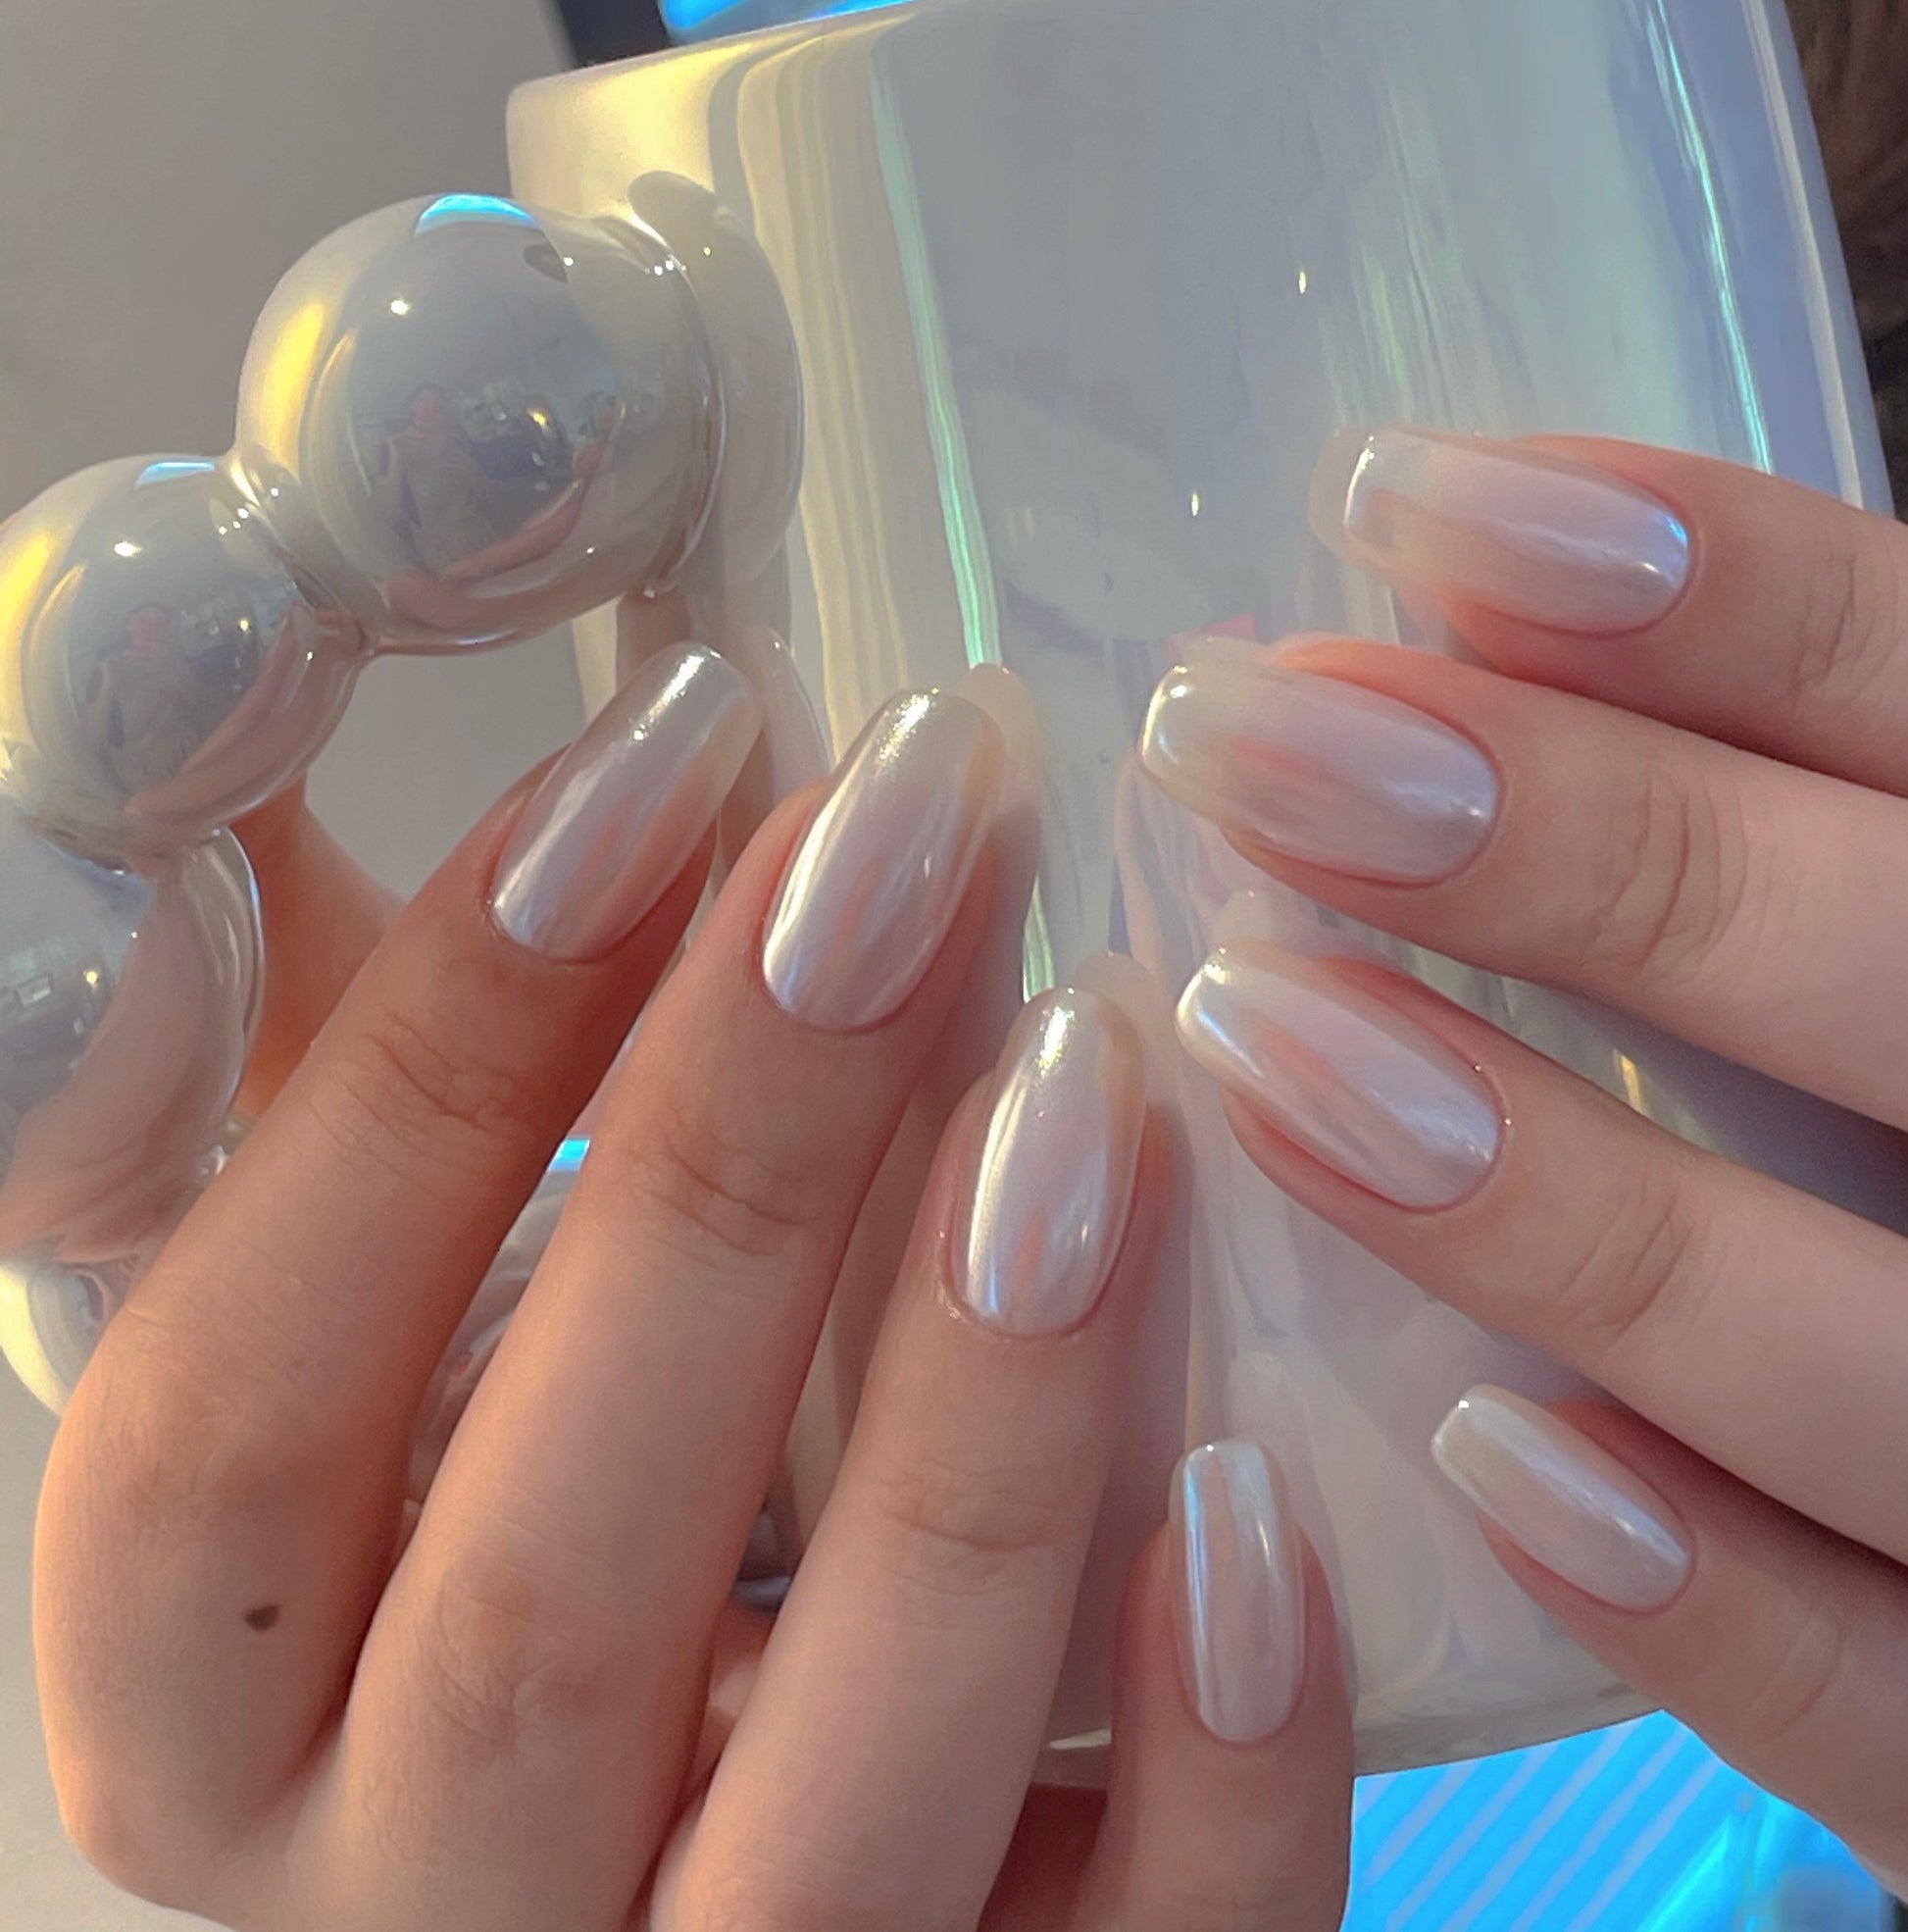 If you loved the glazed donut nail trend— try pearl white chrome